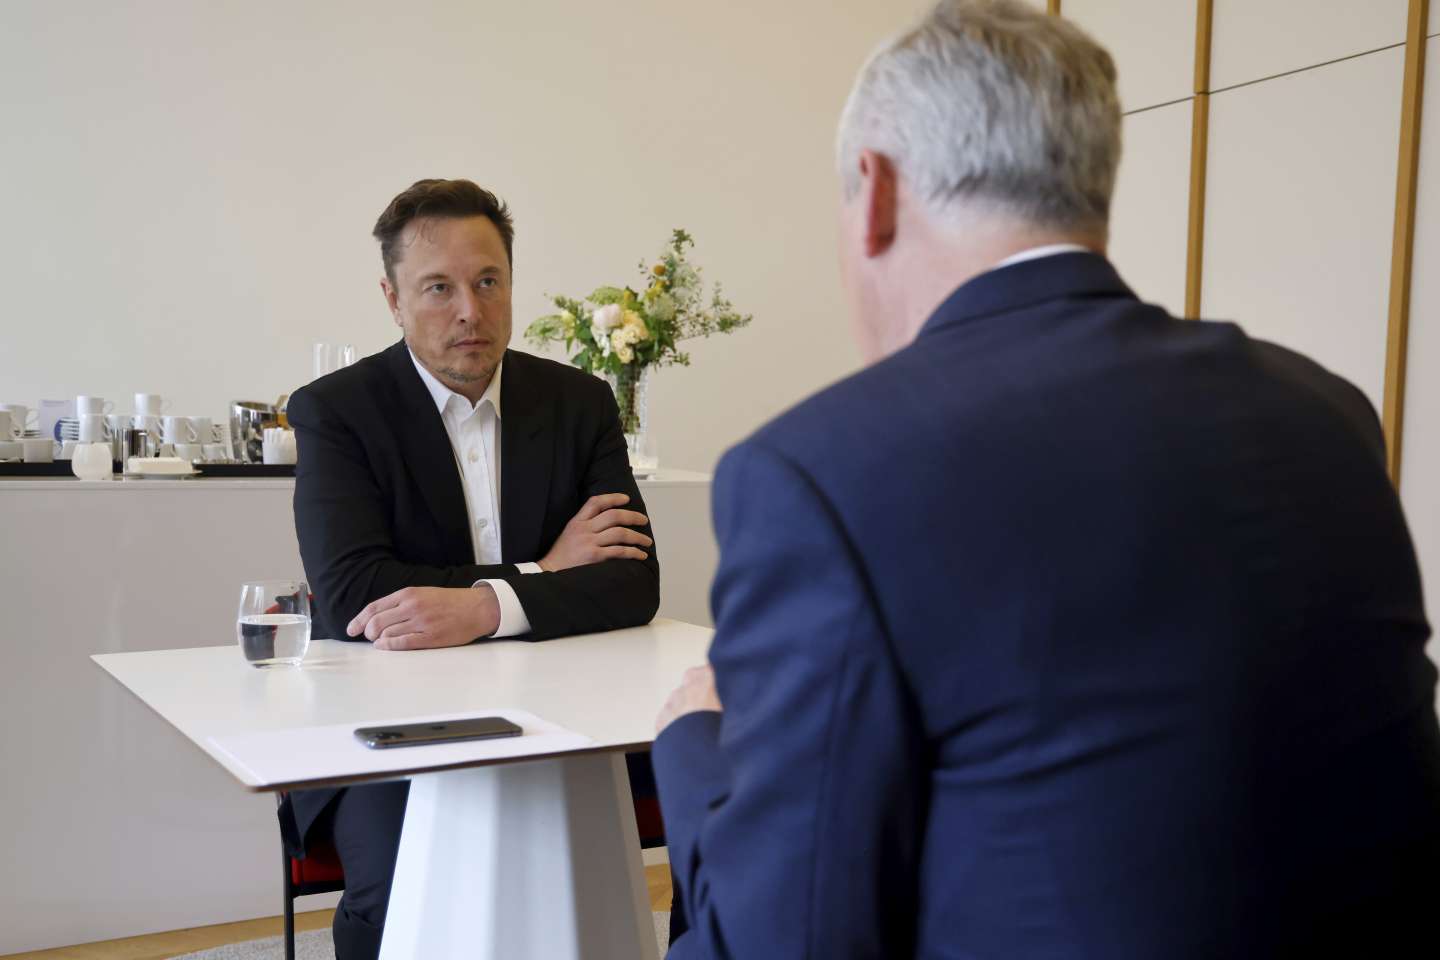 Choose France: Elon Musk says that “Tesla will make significant investments in France” in the near future